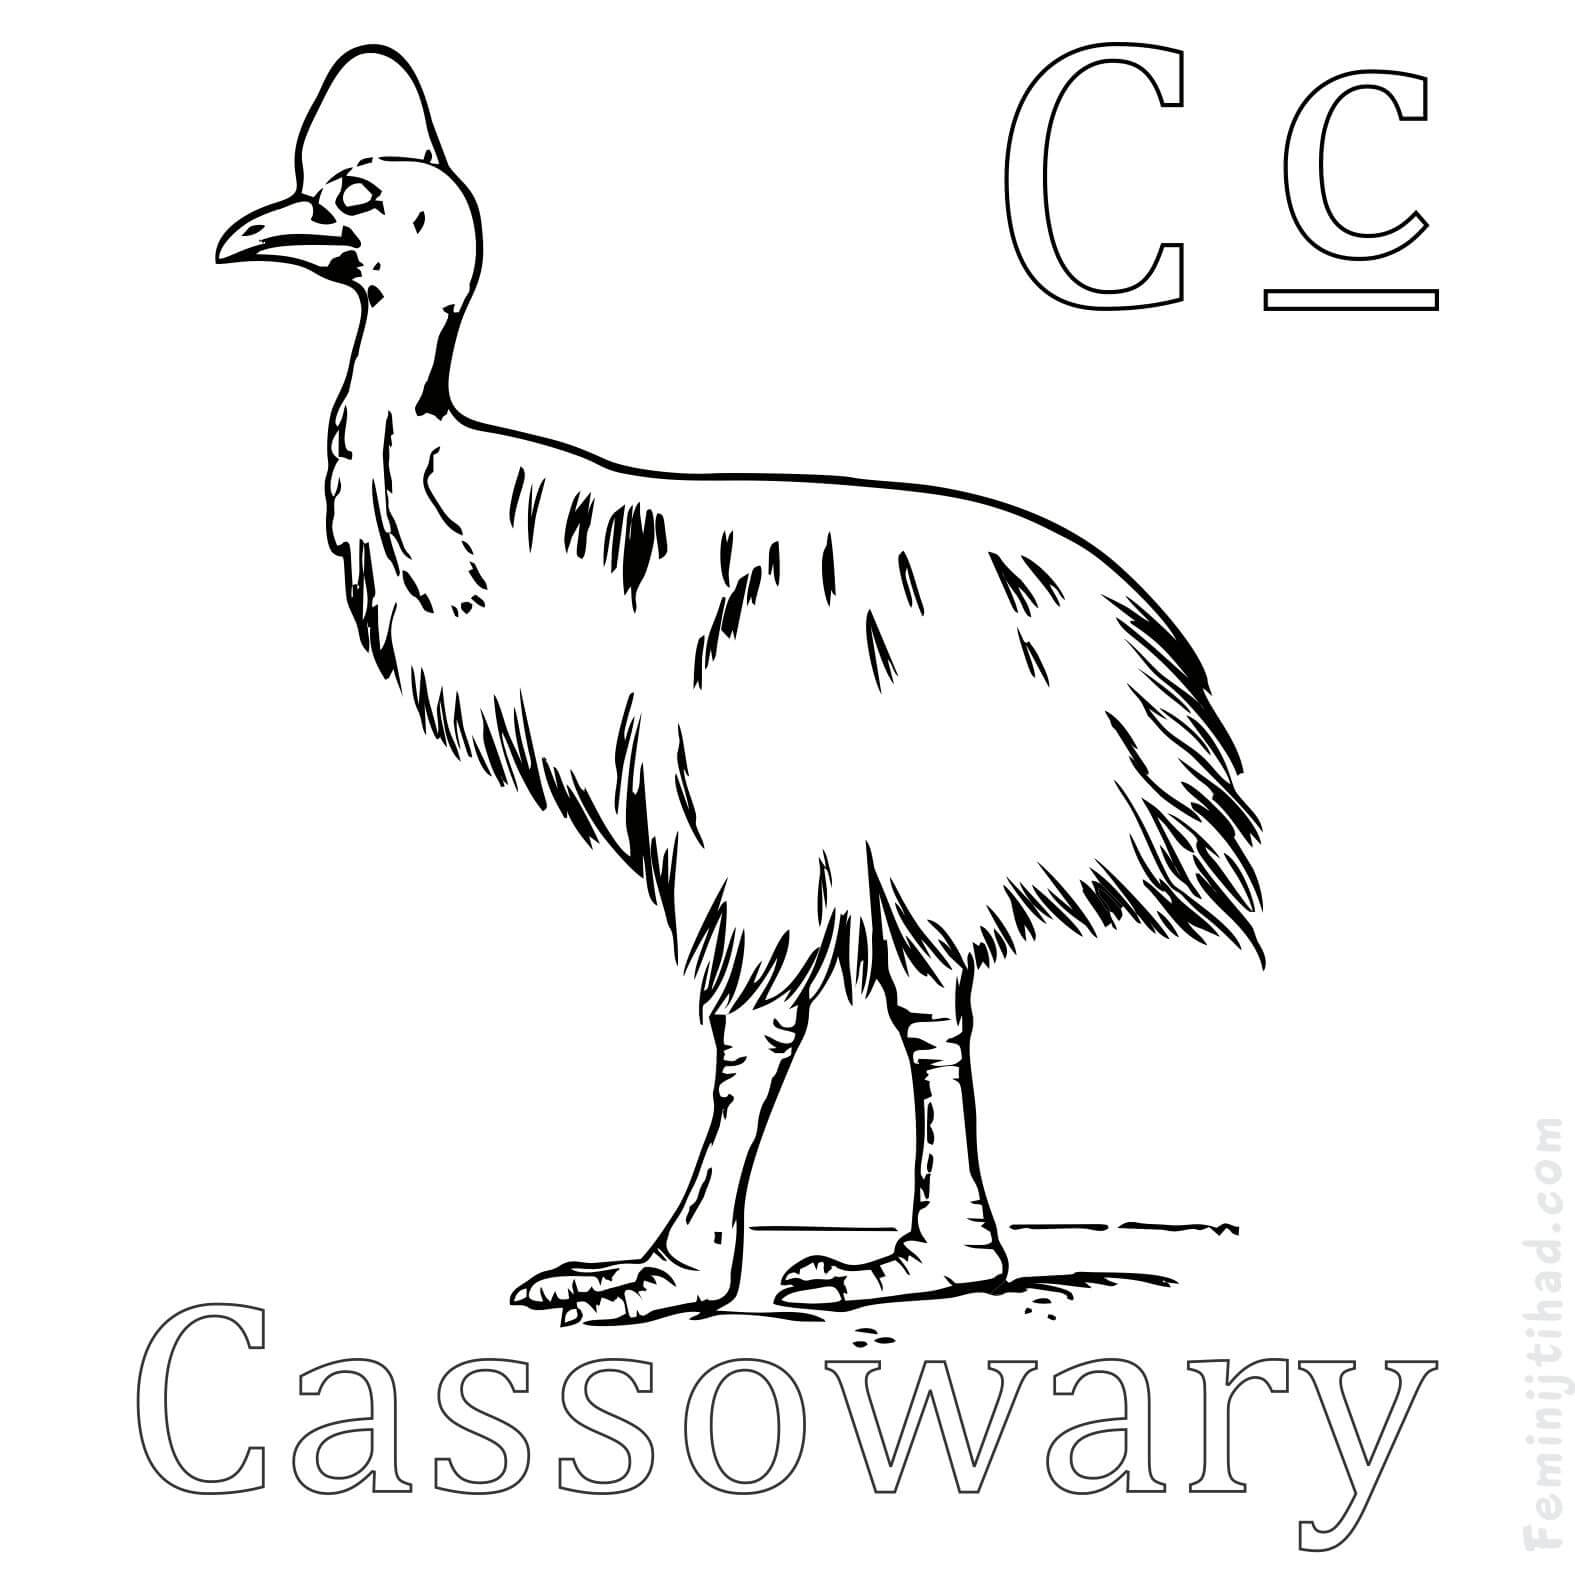 Cassowary Coloring Page to Print